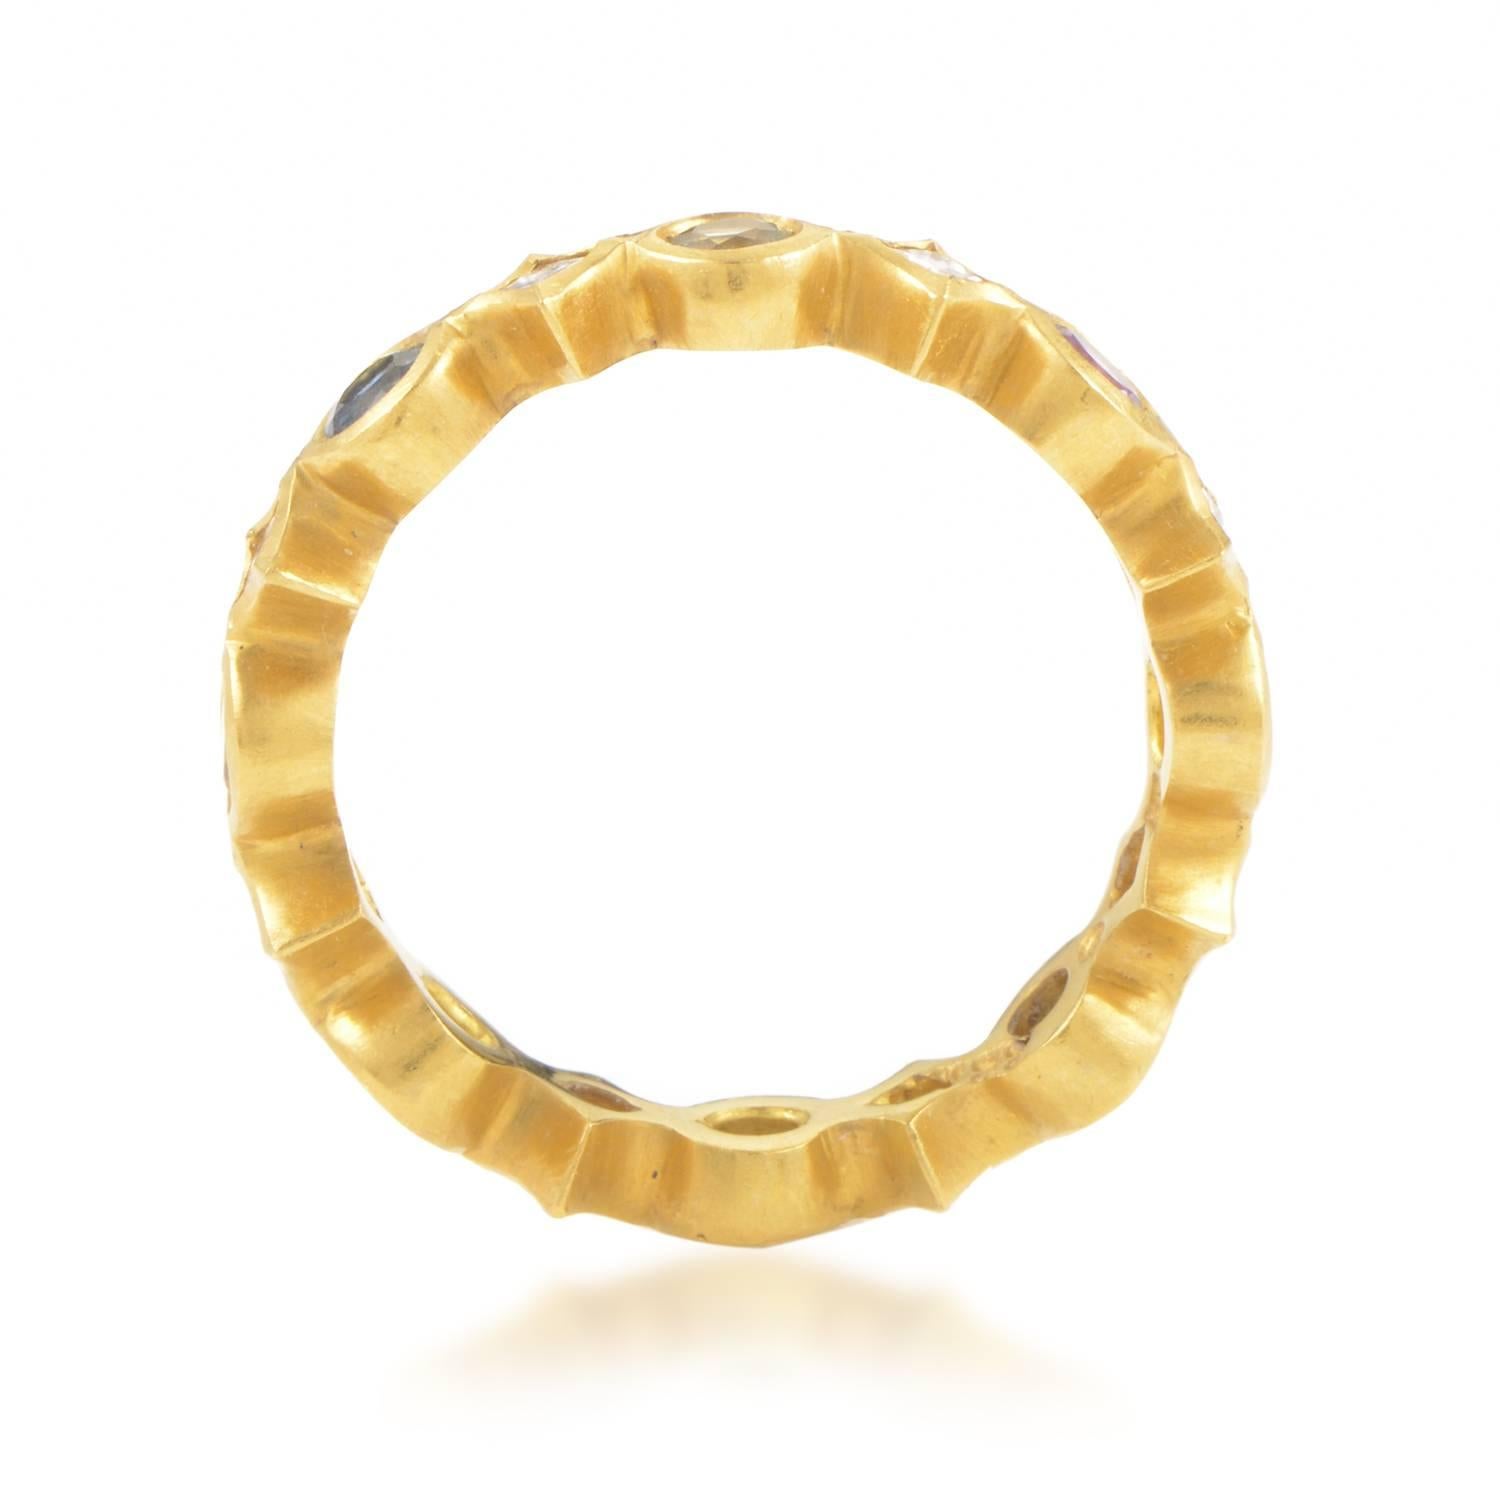 Designed in an offbeat manner to embrace multicolored sapphires totaling 0.70ct and glistening diamonds weighing in total 0.30ct into its radiant warmth, the 18K yellow gold sets a romantic tone in this lovely ring from Cathy Waterman.
Ring Size: